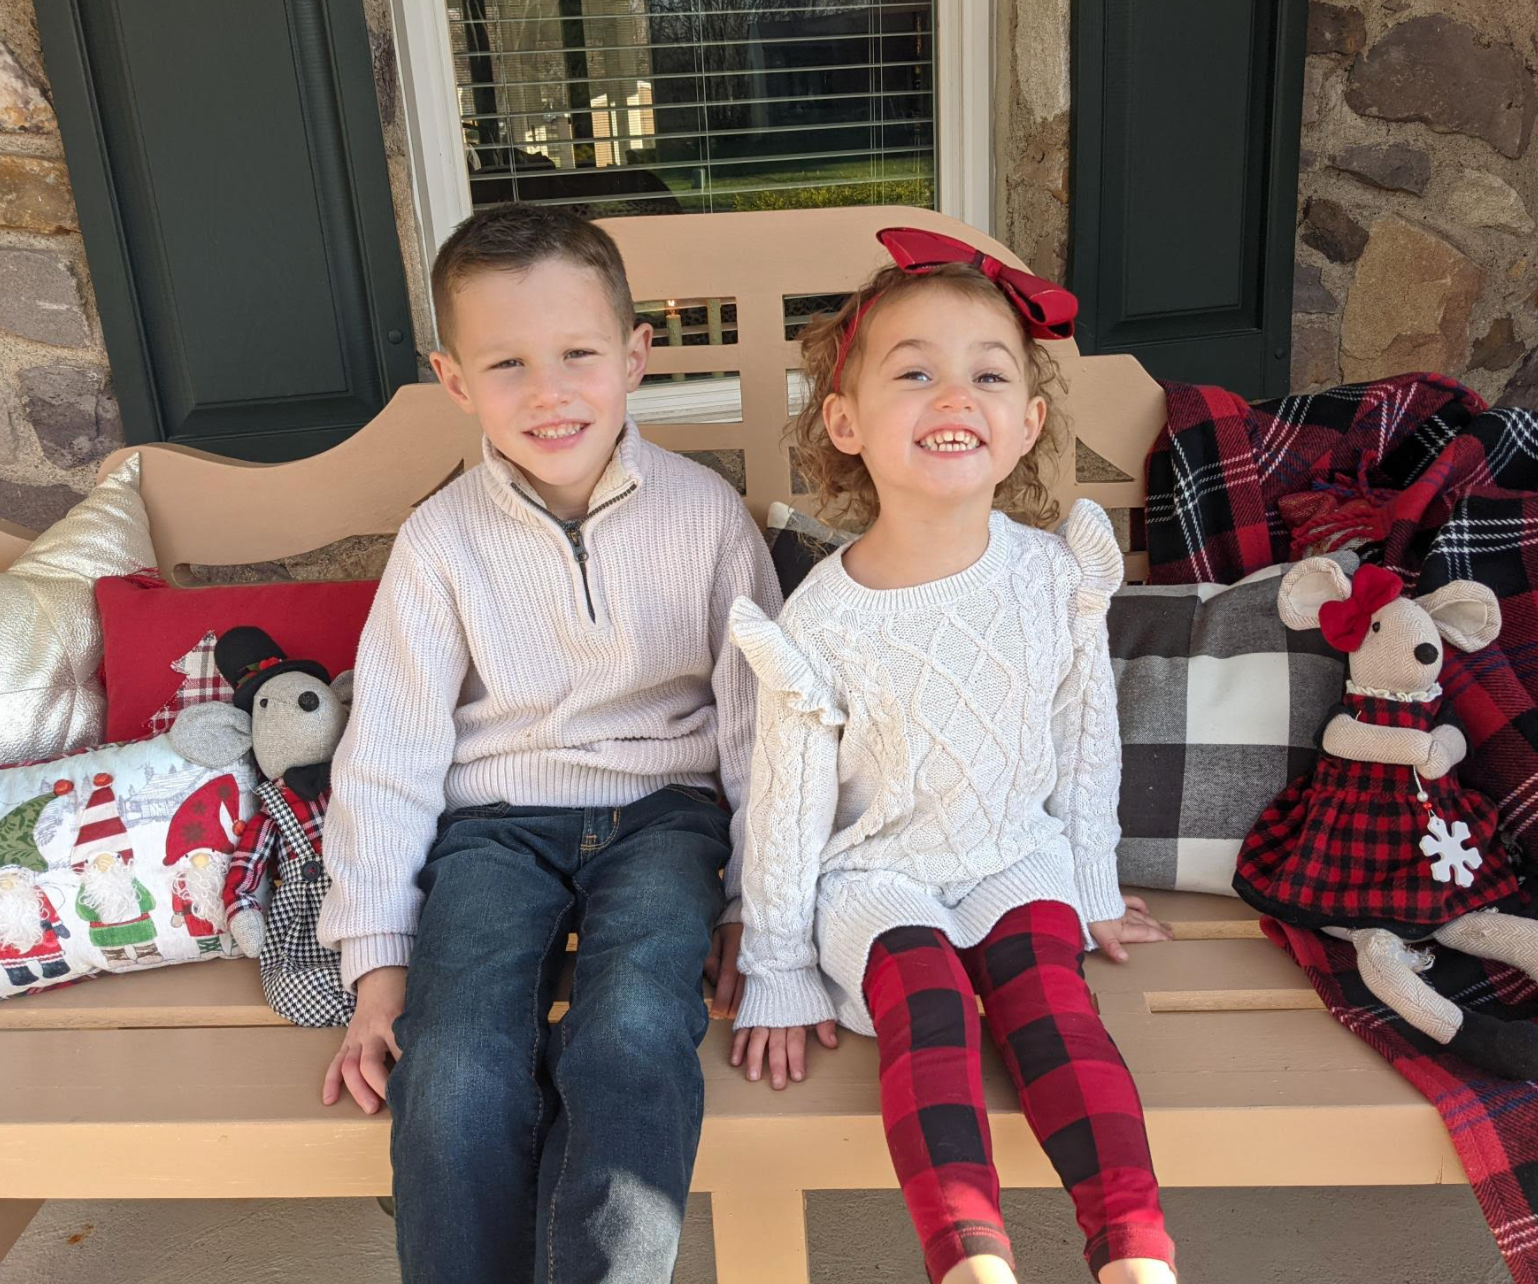 Lauren and her sibling sitting on a bench filled holiday-decorated pillows and stuffed toys